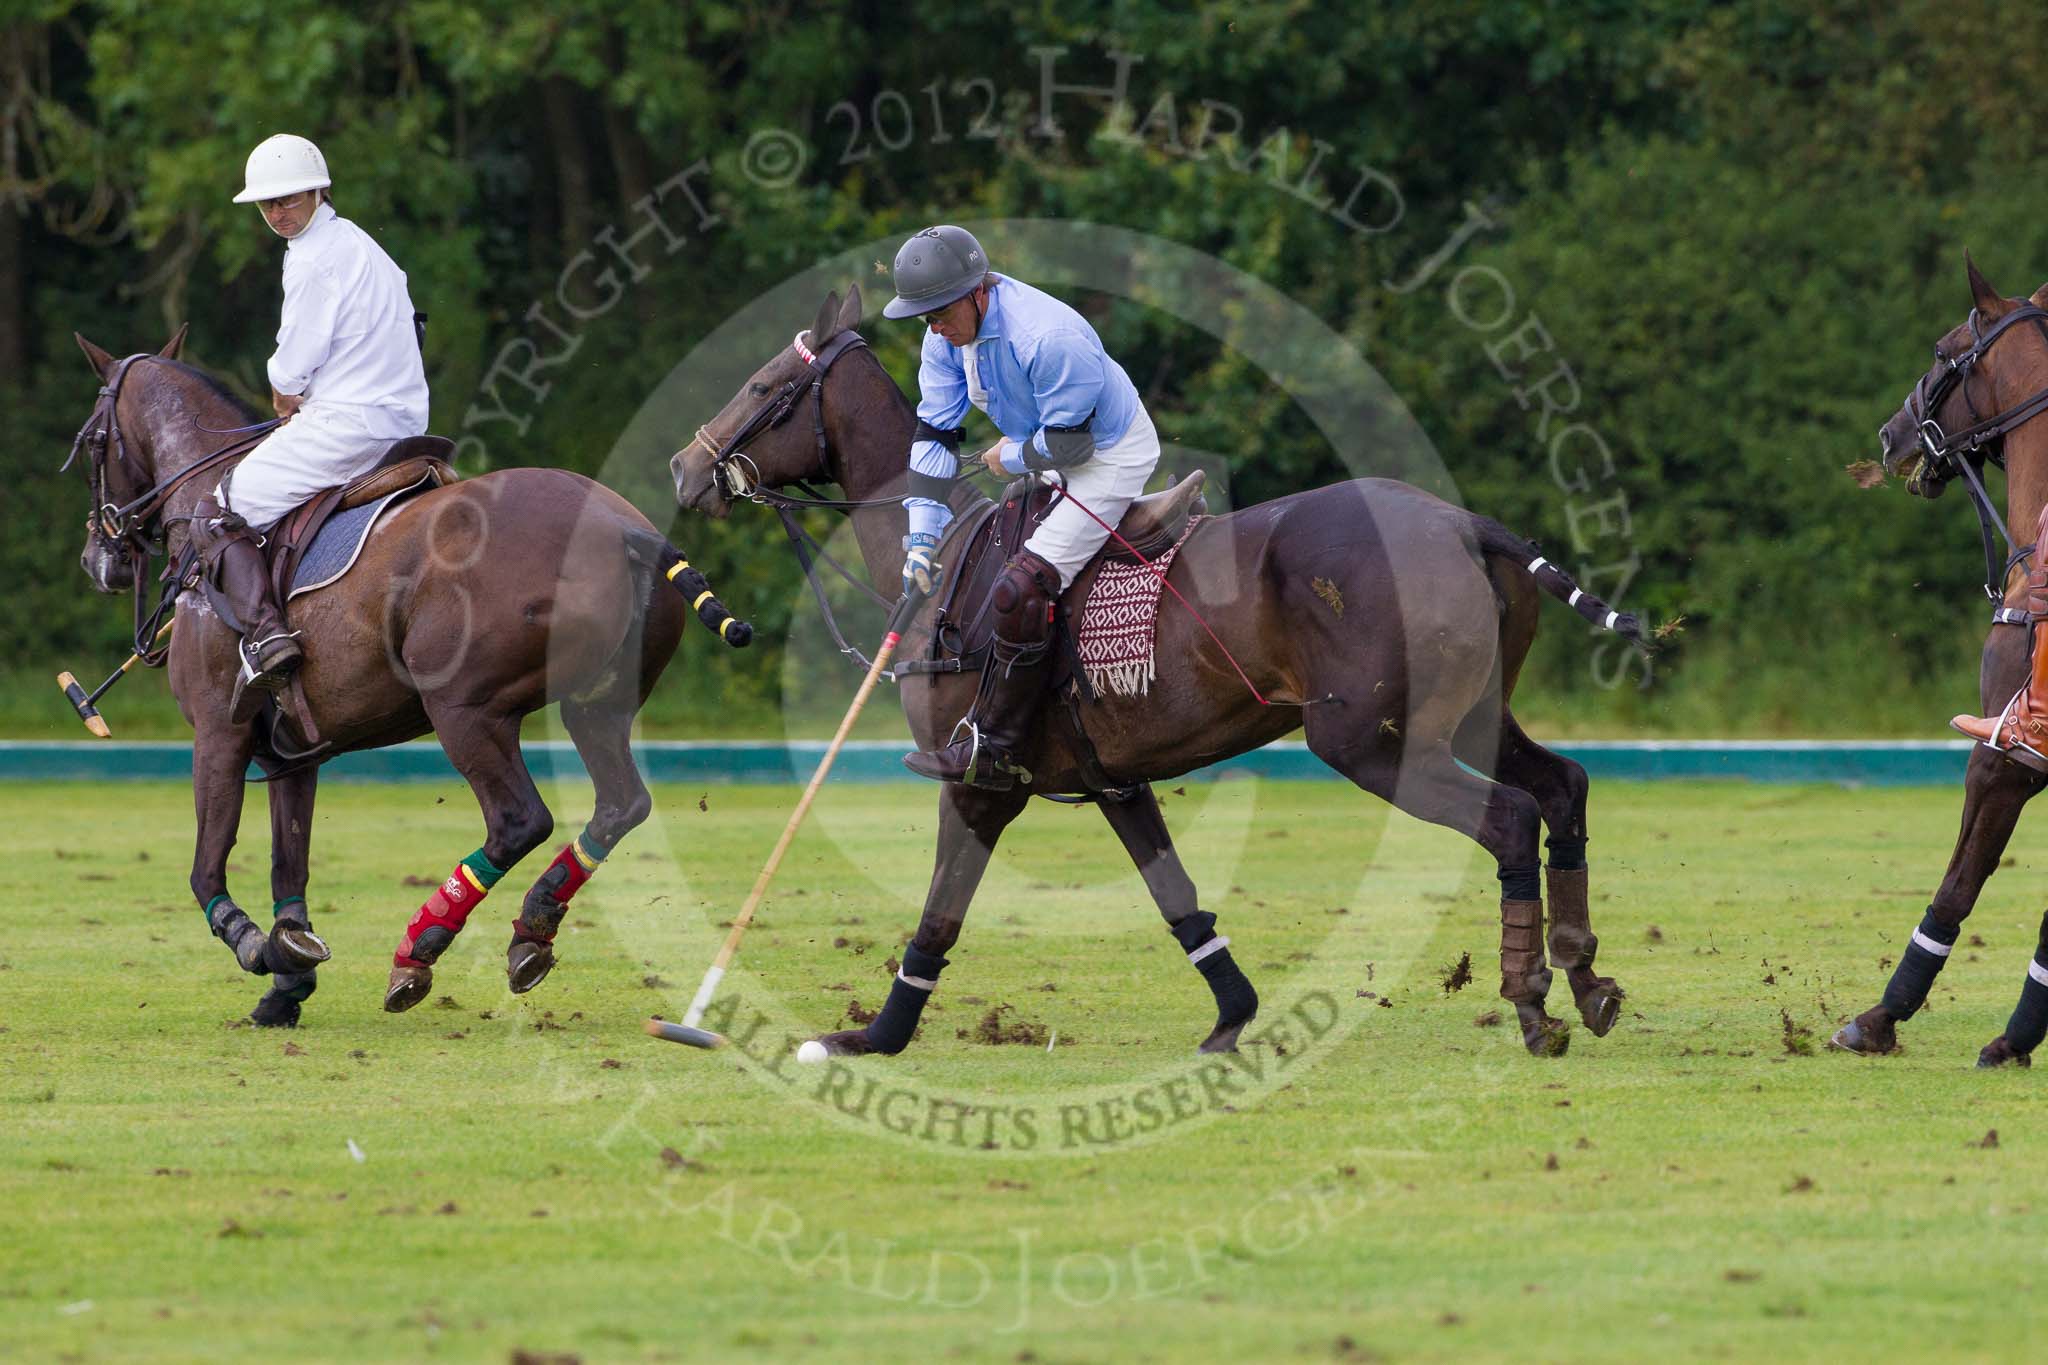 7th Heritage Polo Cup semi-finals: La Mariposa Argentina Sebastian Funes on the nearside..
Hurtwood Park Polo Club,
Ewhurst Green,
Surrey,
United Kingdom,
on 04 August 2012 at 15:44, image #270